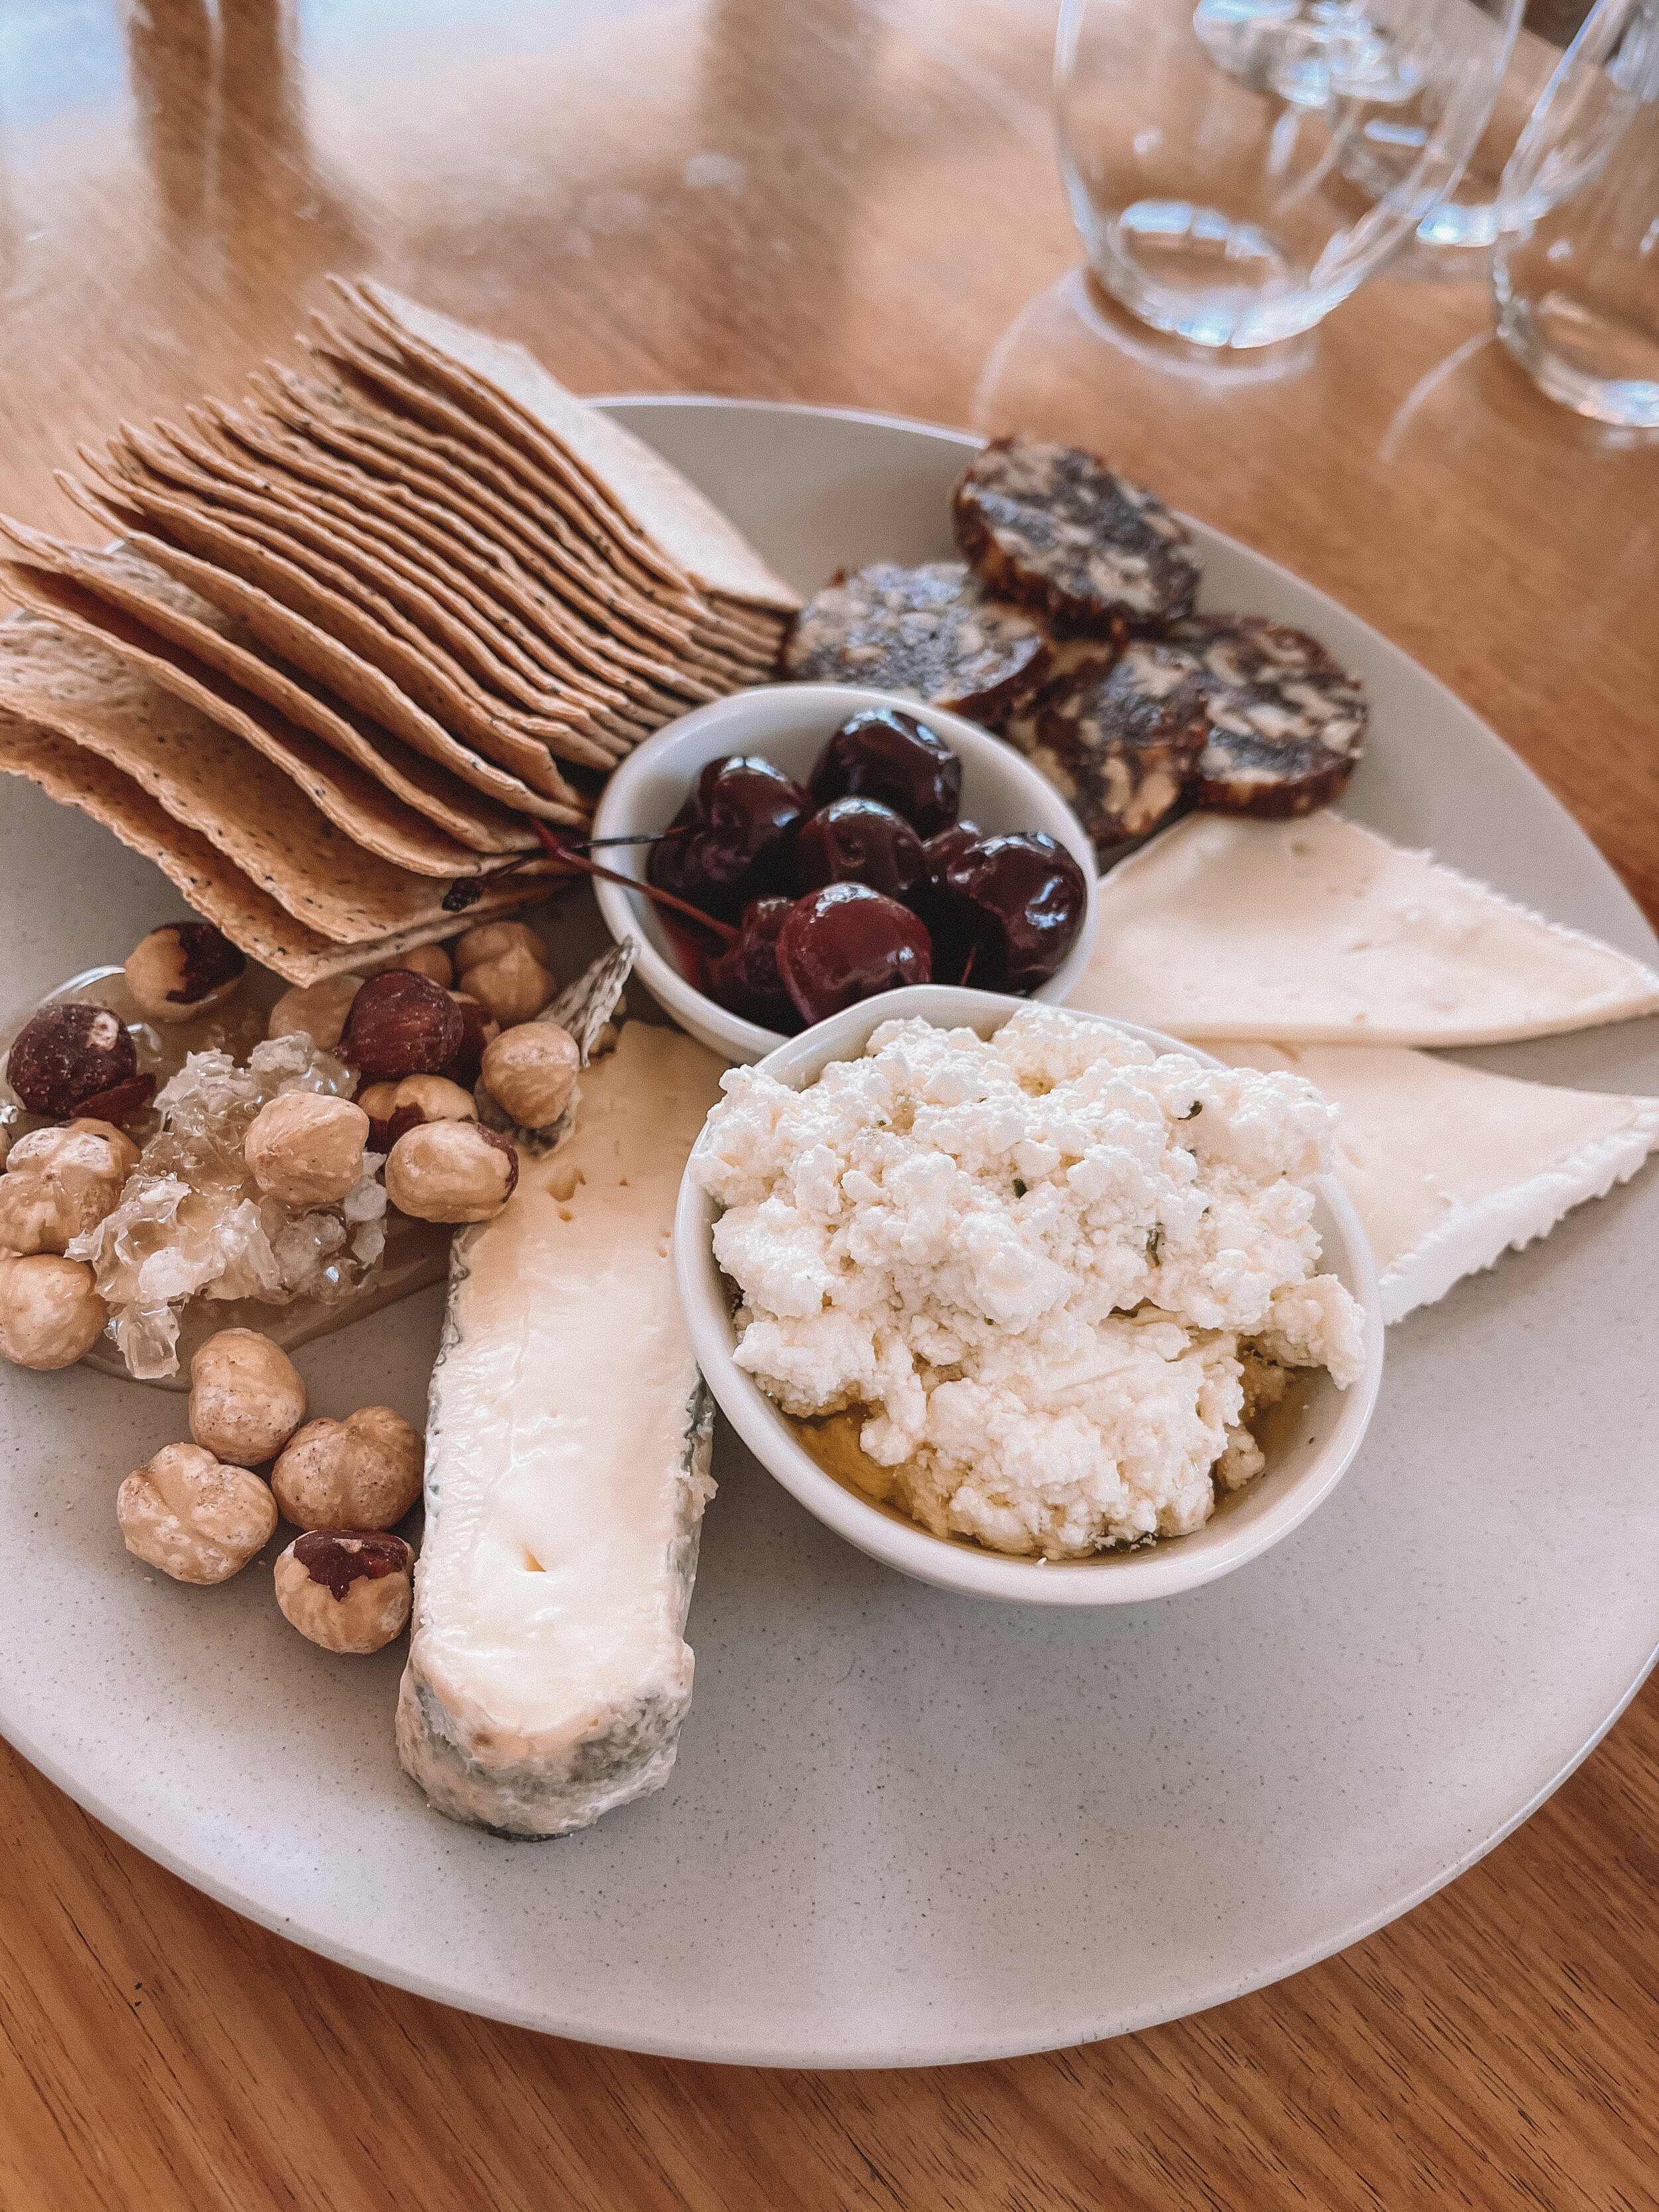 Delicious Cheese plate - Logan Wines - Mudgee - New South Wales (NSW) - Australia